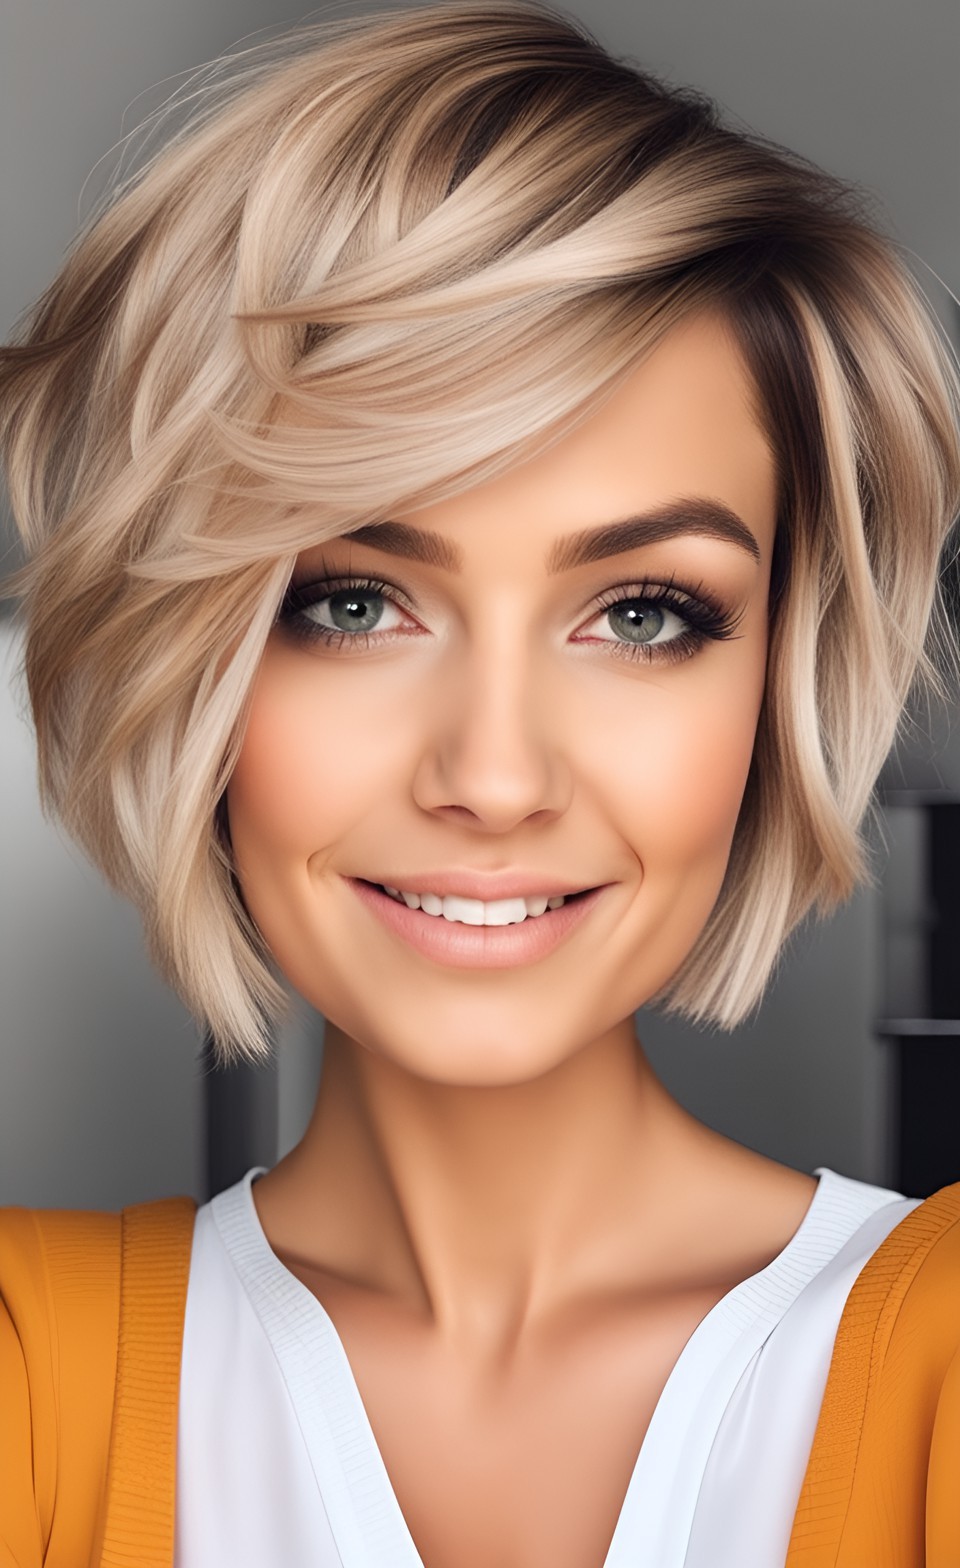 Stunning And Sassy Short Hairstyles For Fine Hair That Are Too Cute For ...